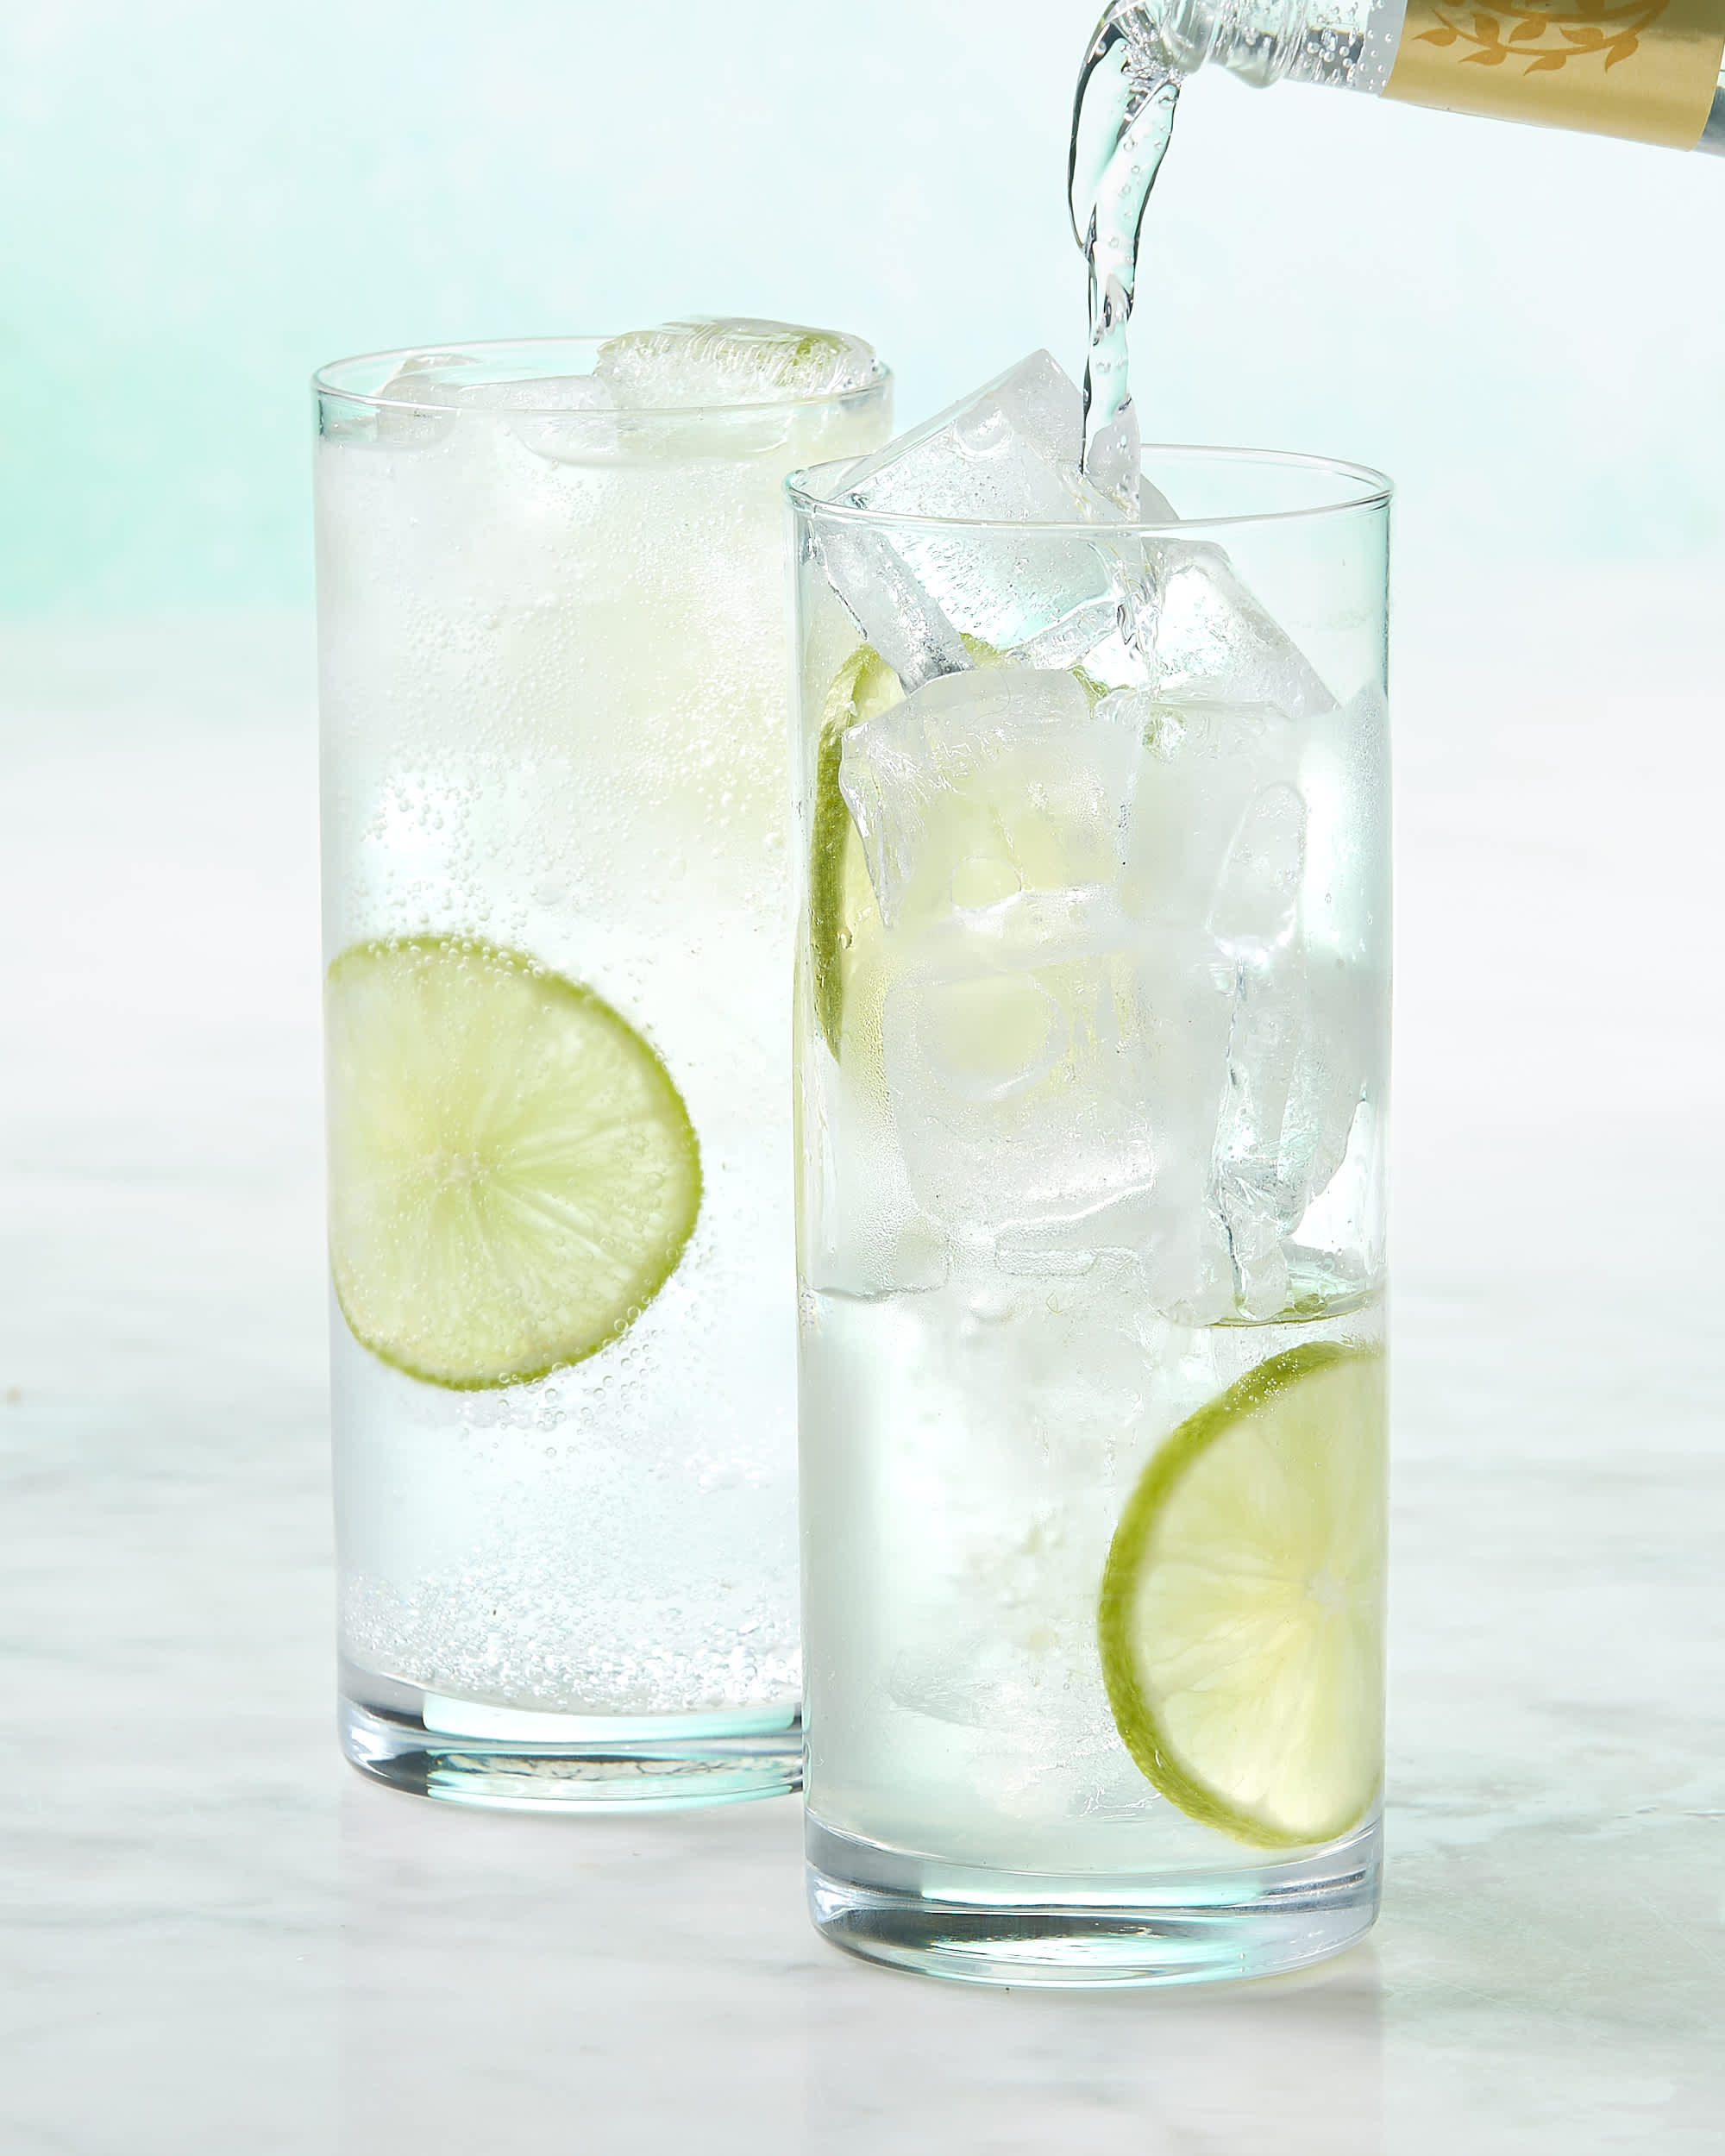 https://cdn.apartmenttherapy.info/image/upload/v1695067975/k/Photo/Recipes/2023-09-gin-and-tonic/gin-and-tonic-446.jpg